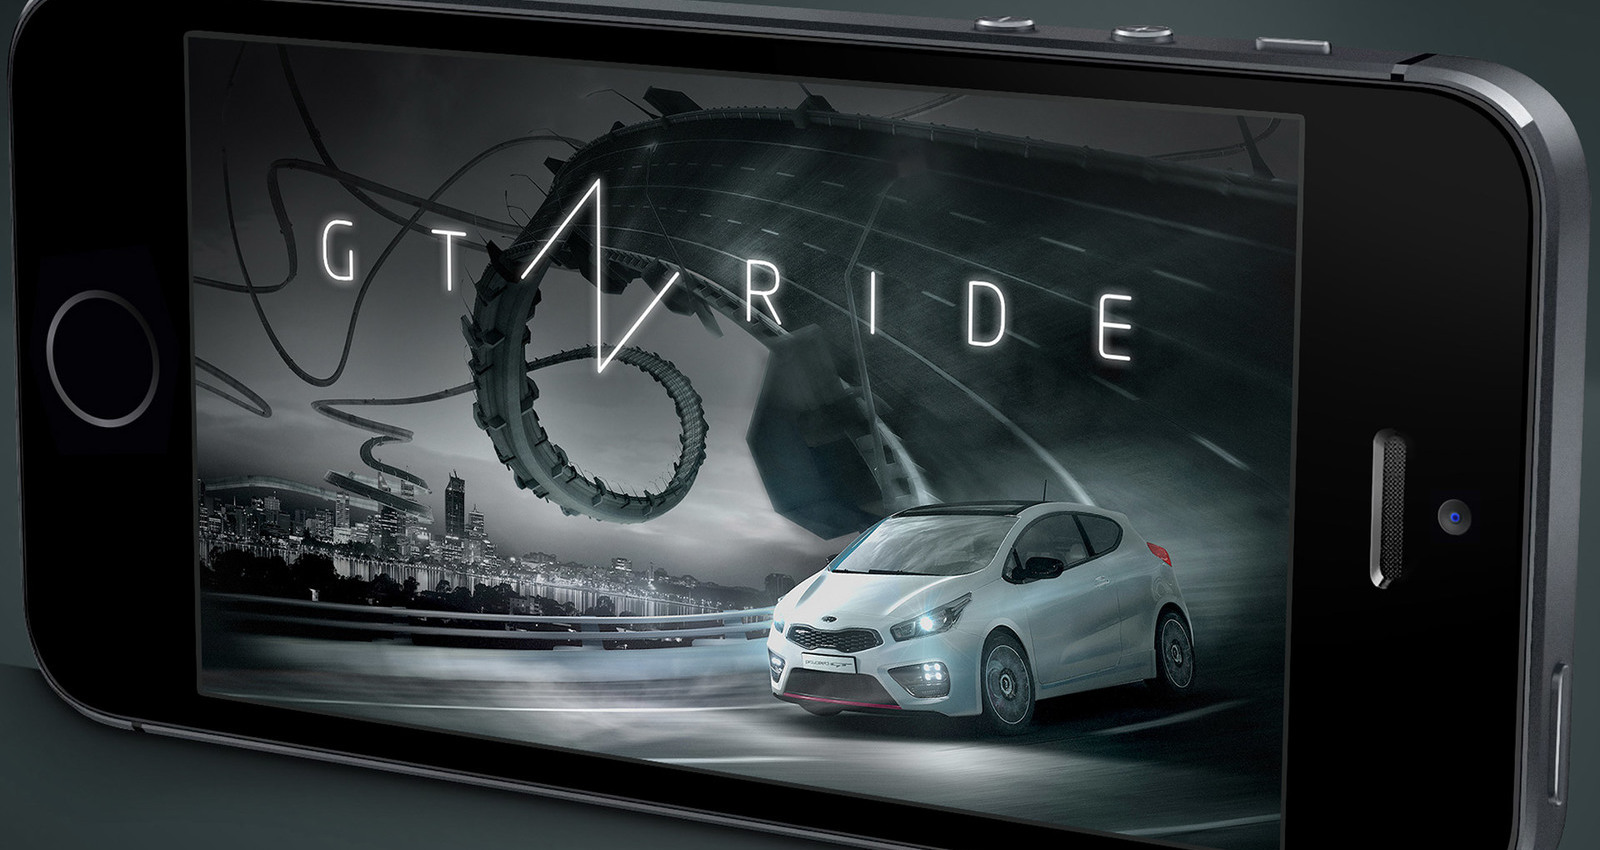 GT RIDE - Viral Gaming for Kia